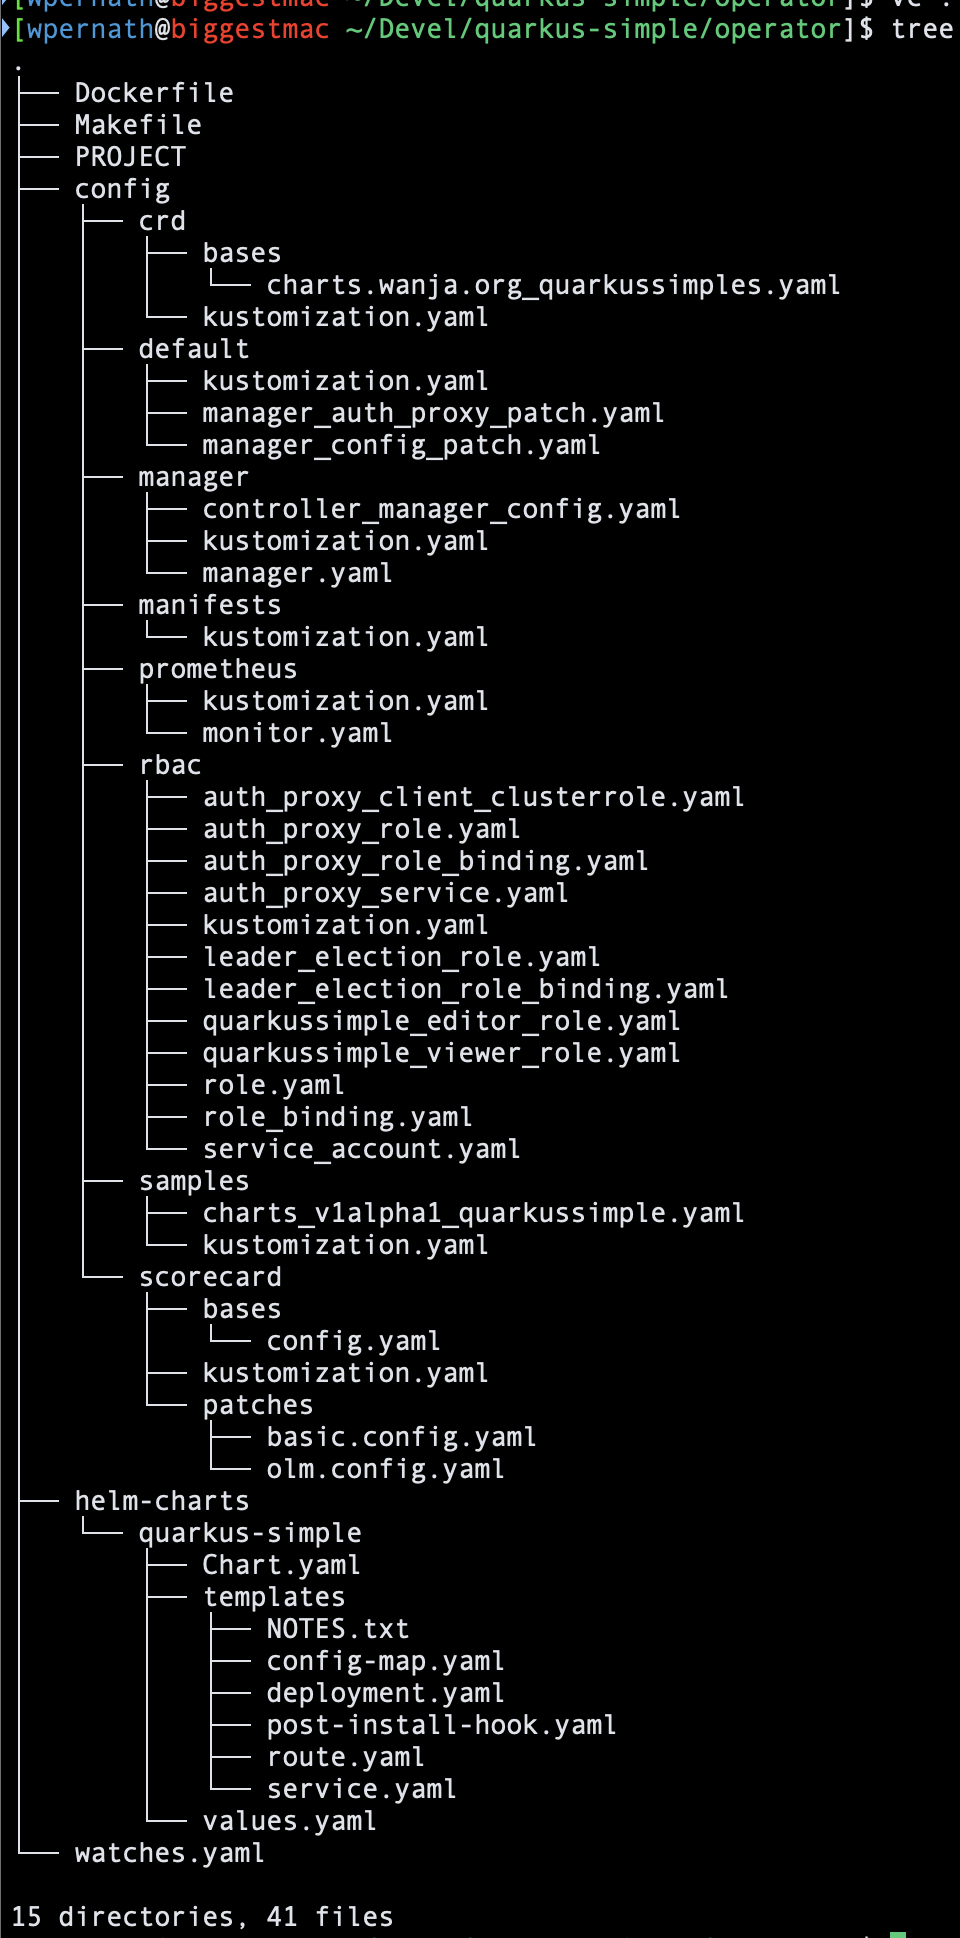 Image 9: Directory structure after calling operator-sdk